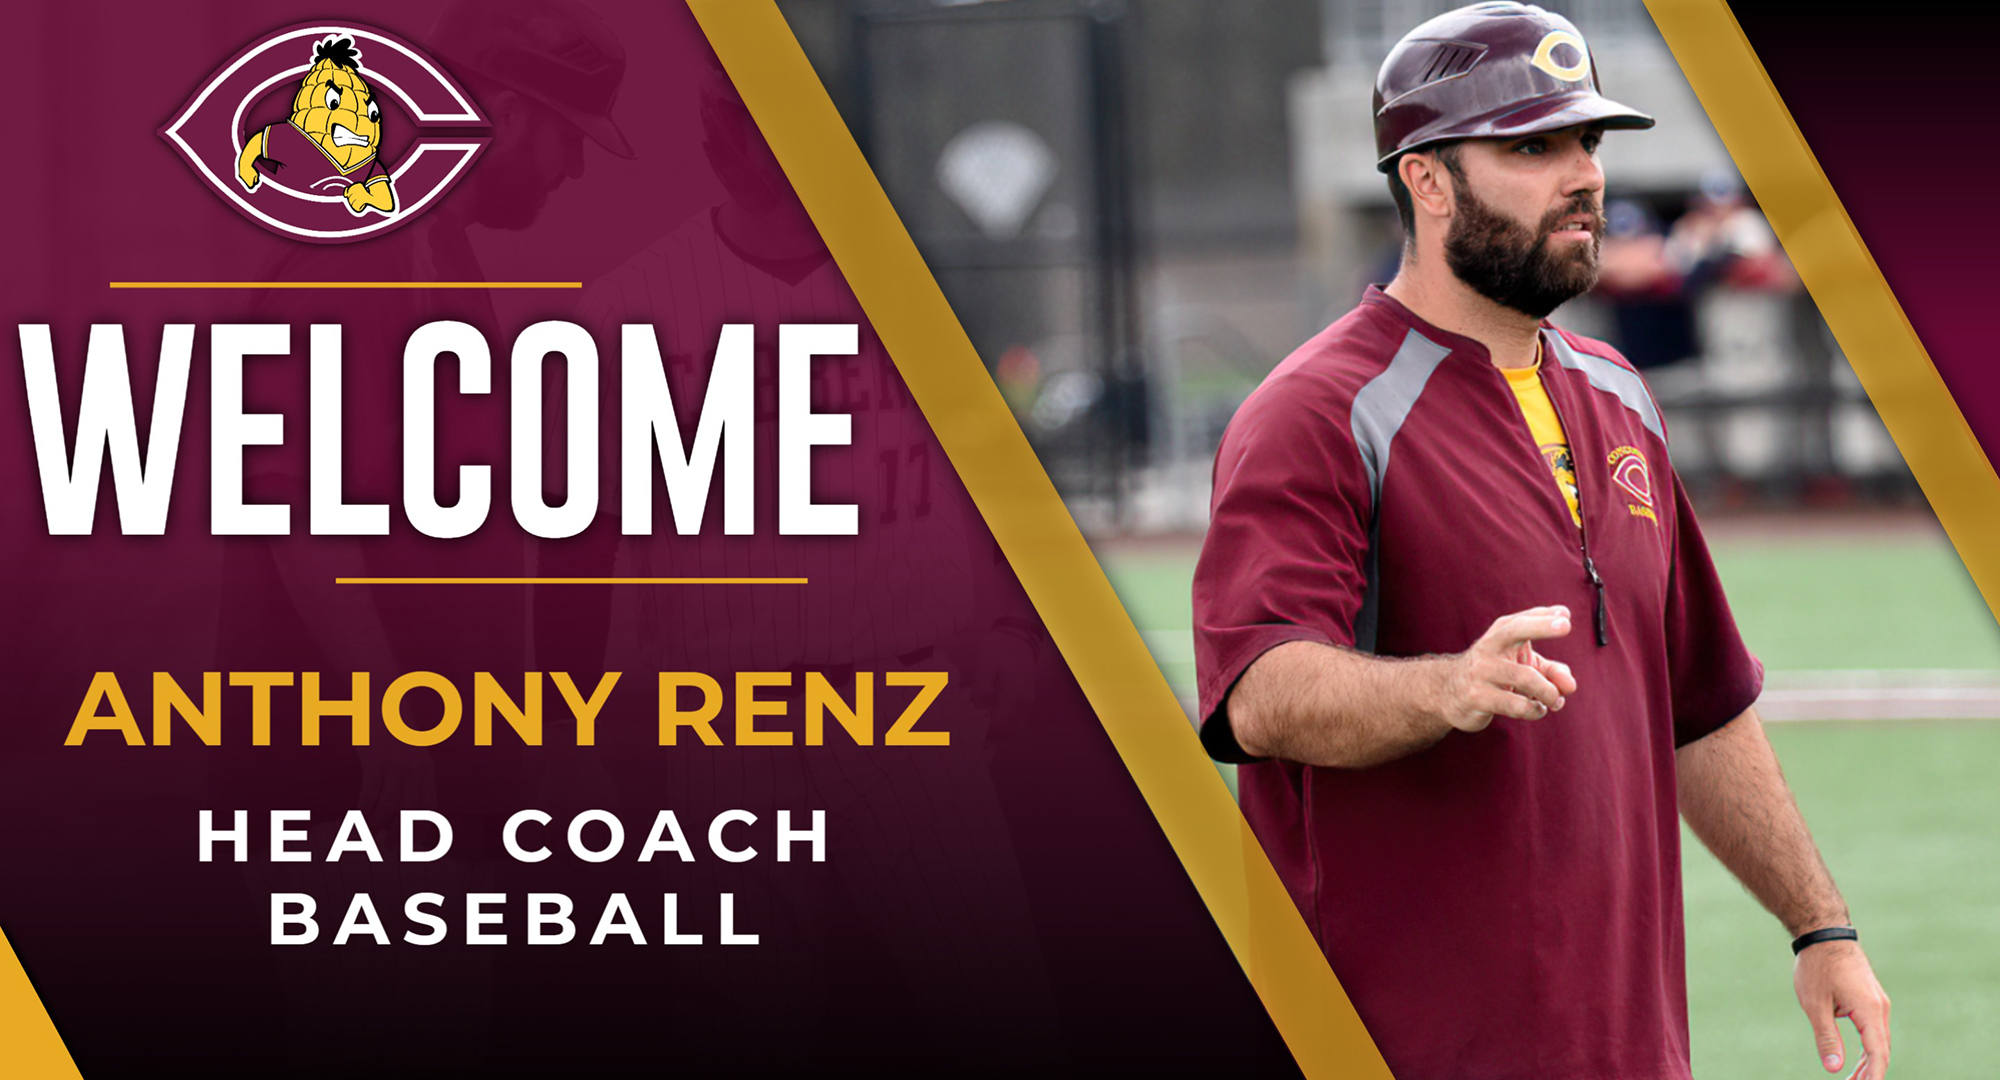 Anthony Renz has been named the new head coach for the Cobber baseball team. He was the assistant coach for five seasons.